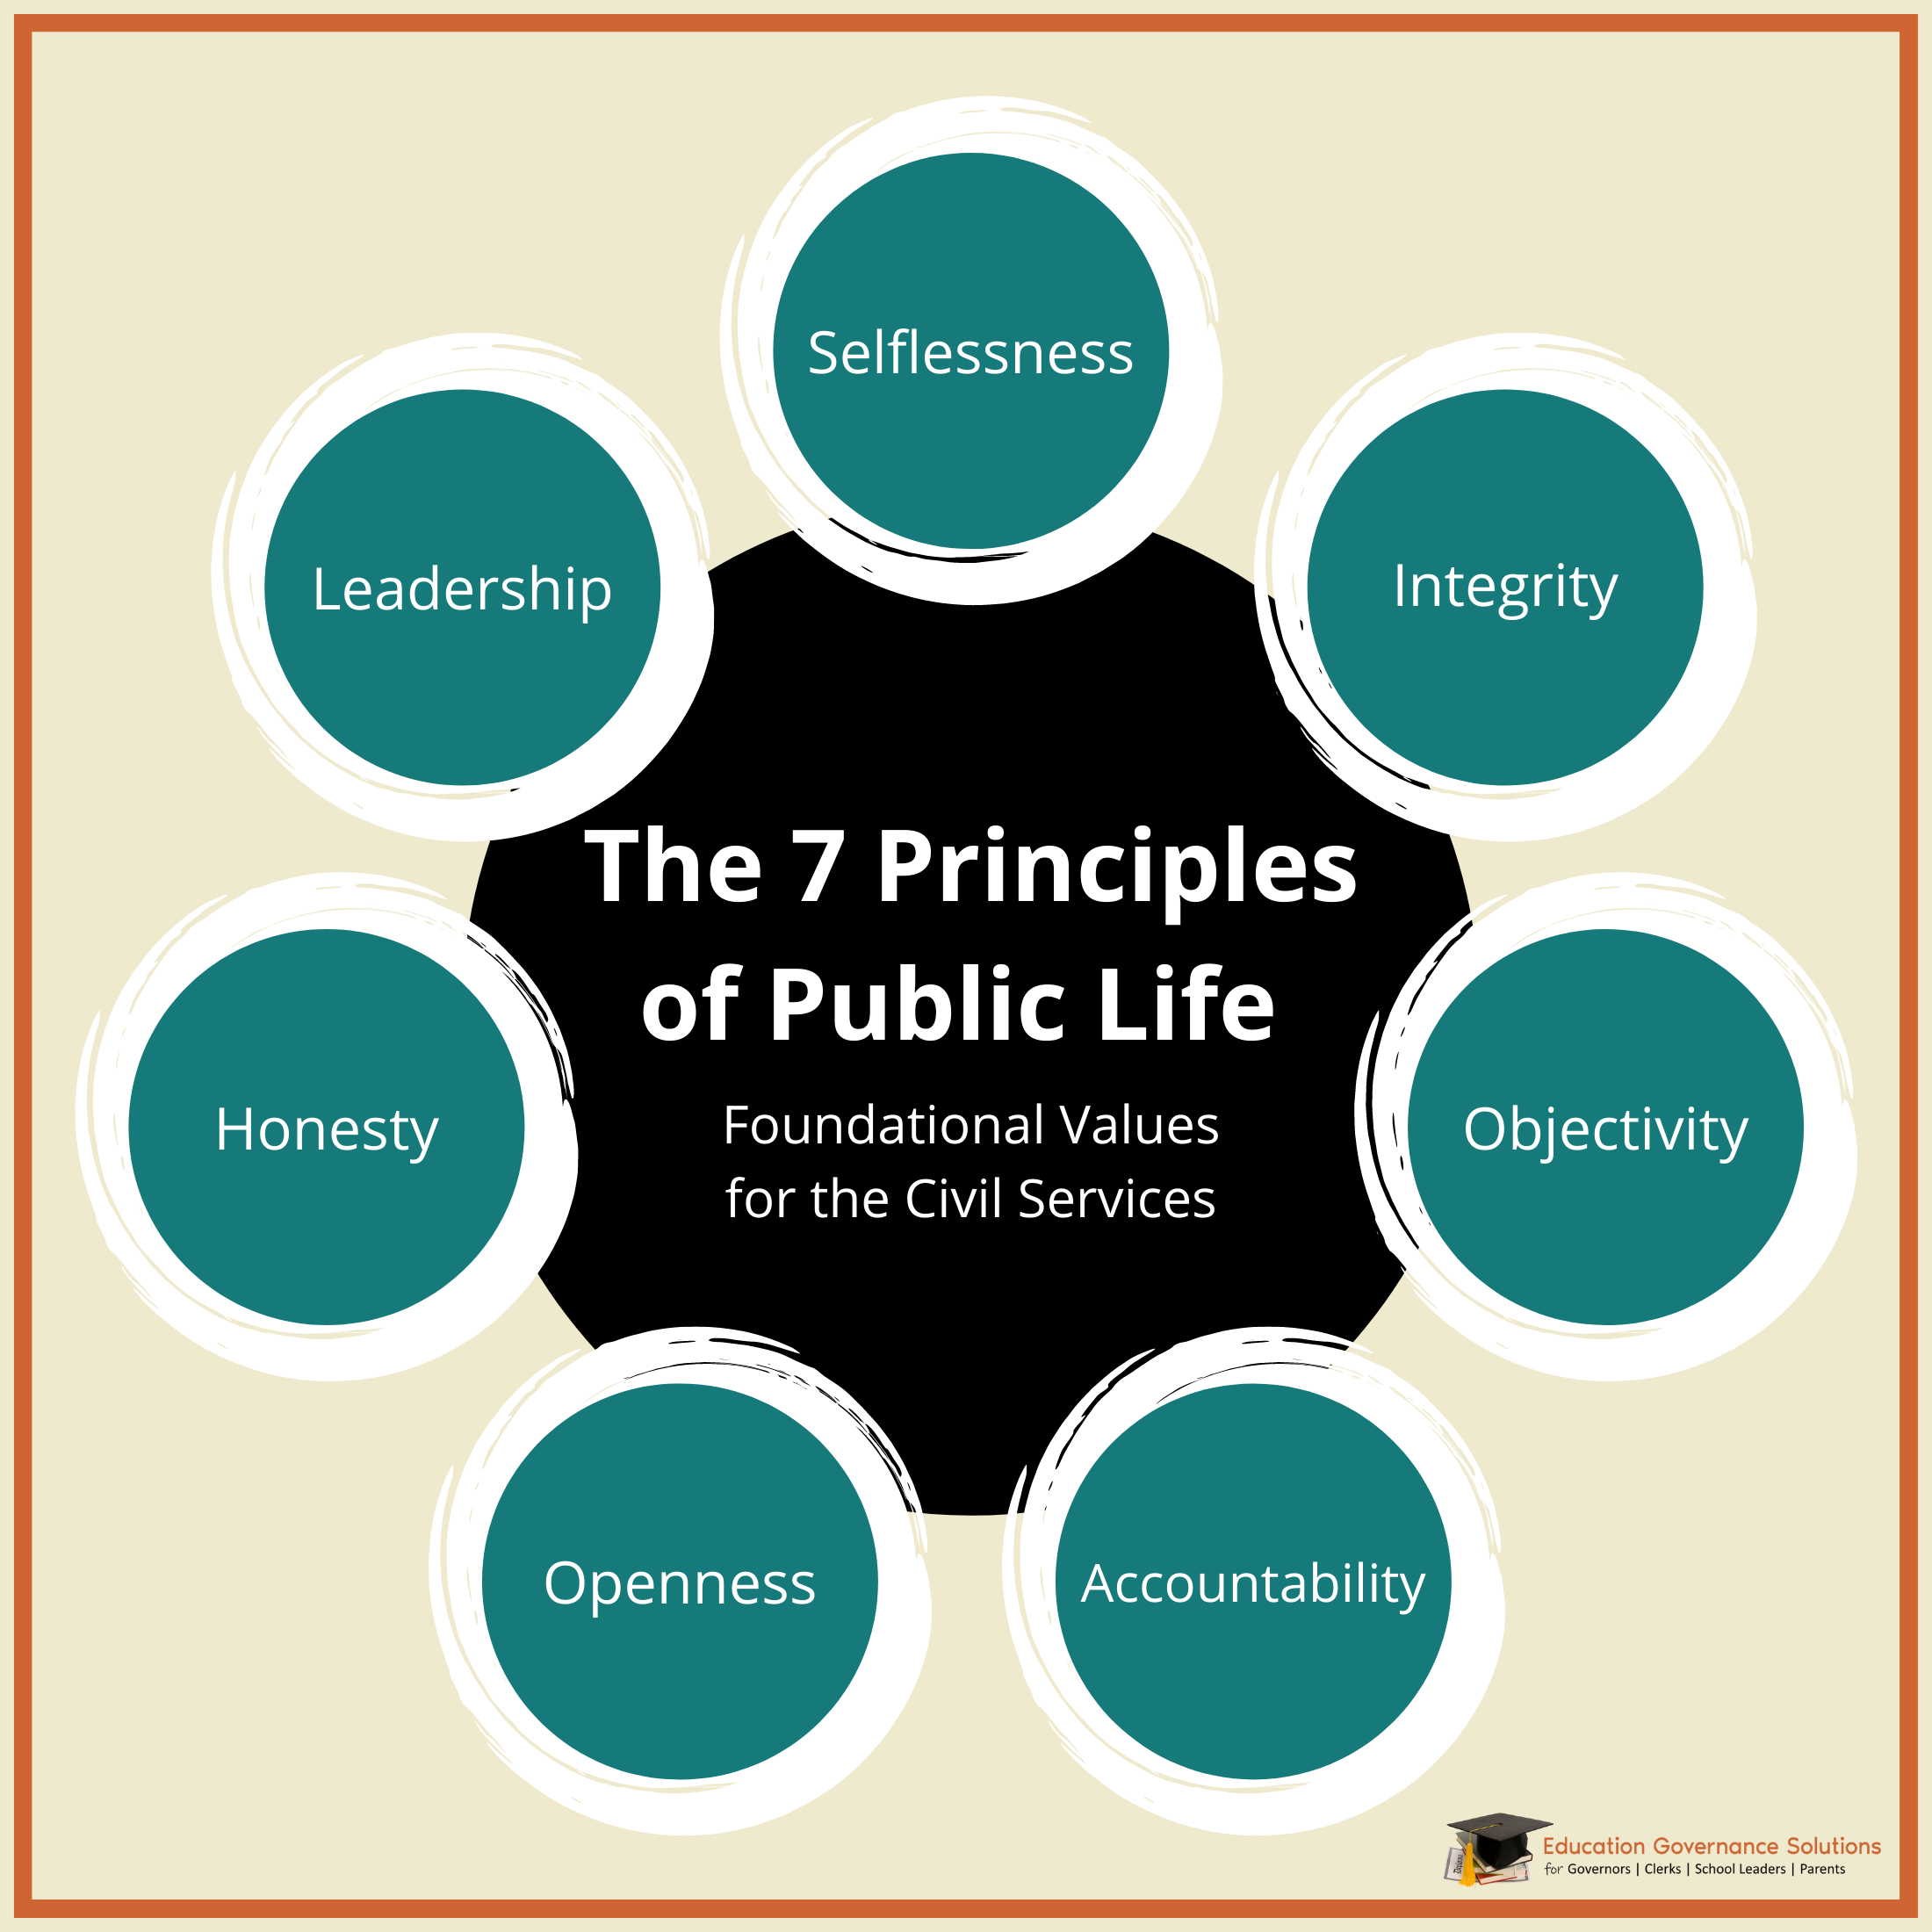 The 7 Principles of Public Life | Education Governance Solutions - Resources